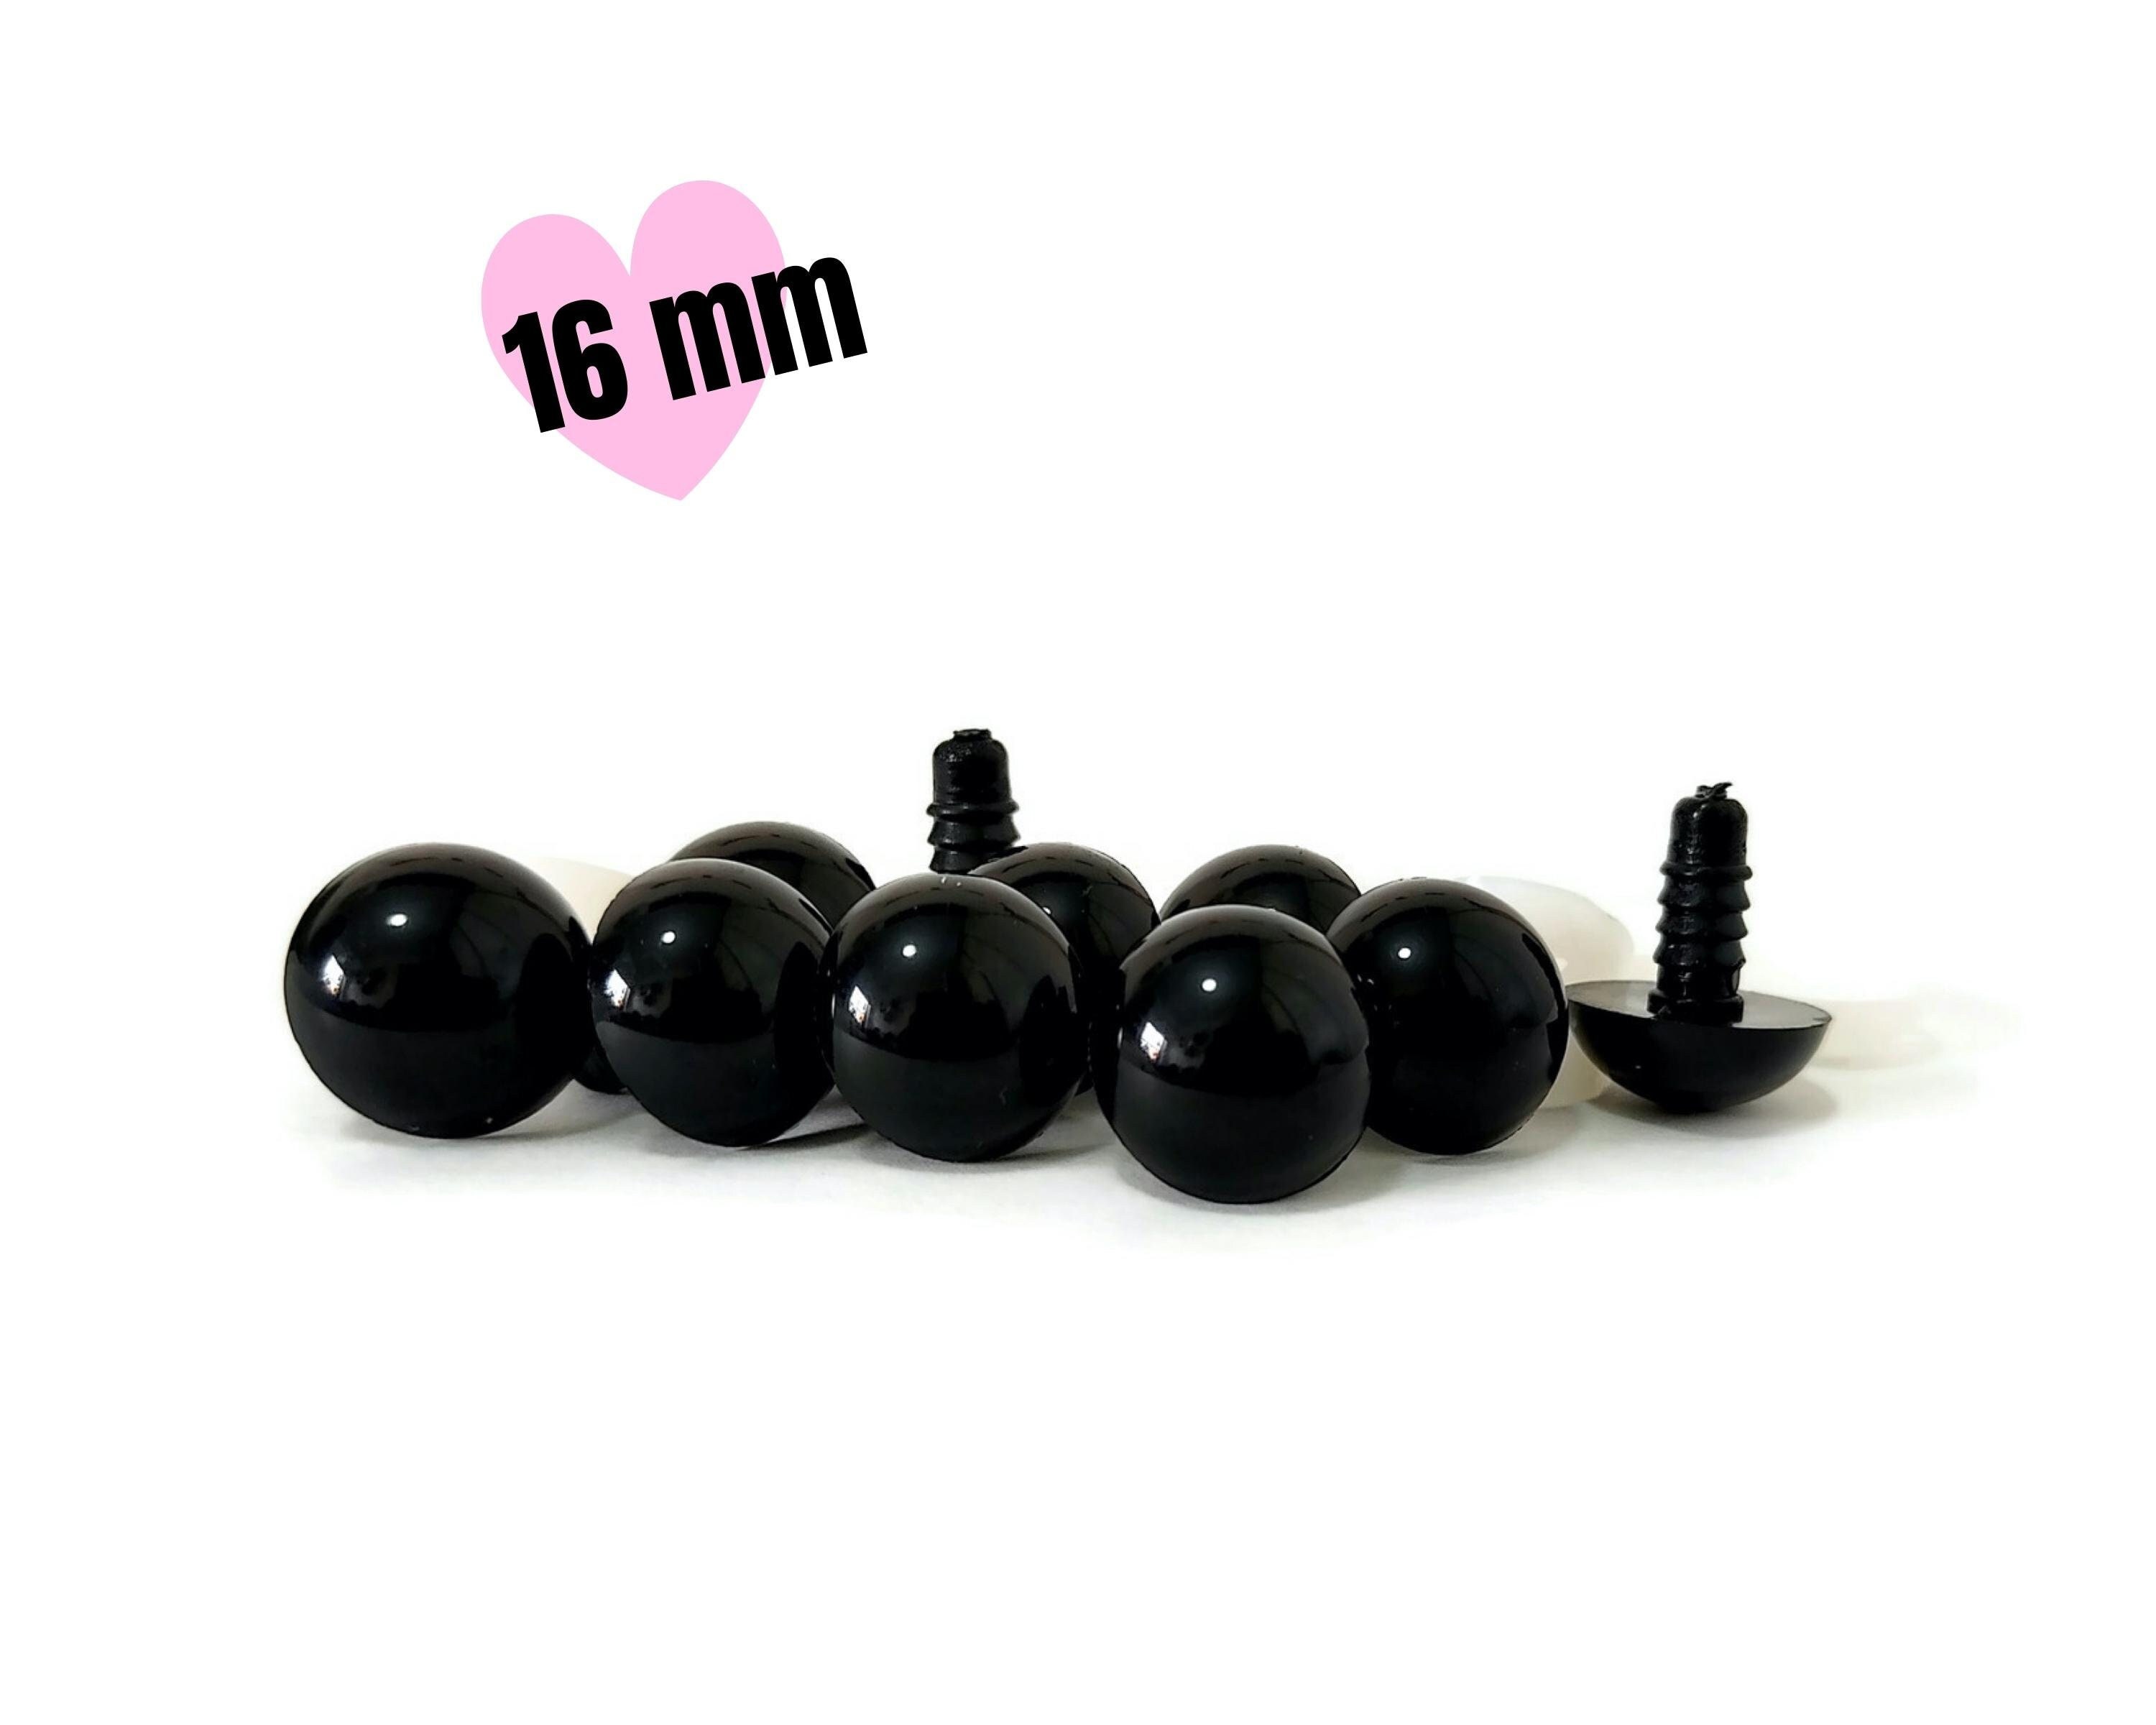 MAGIMODAC 16 Pcs 6 Color Plastic Safety Eyes 9mm 12mm 14mm 16mm